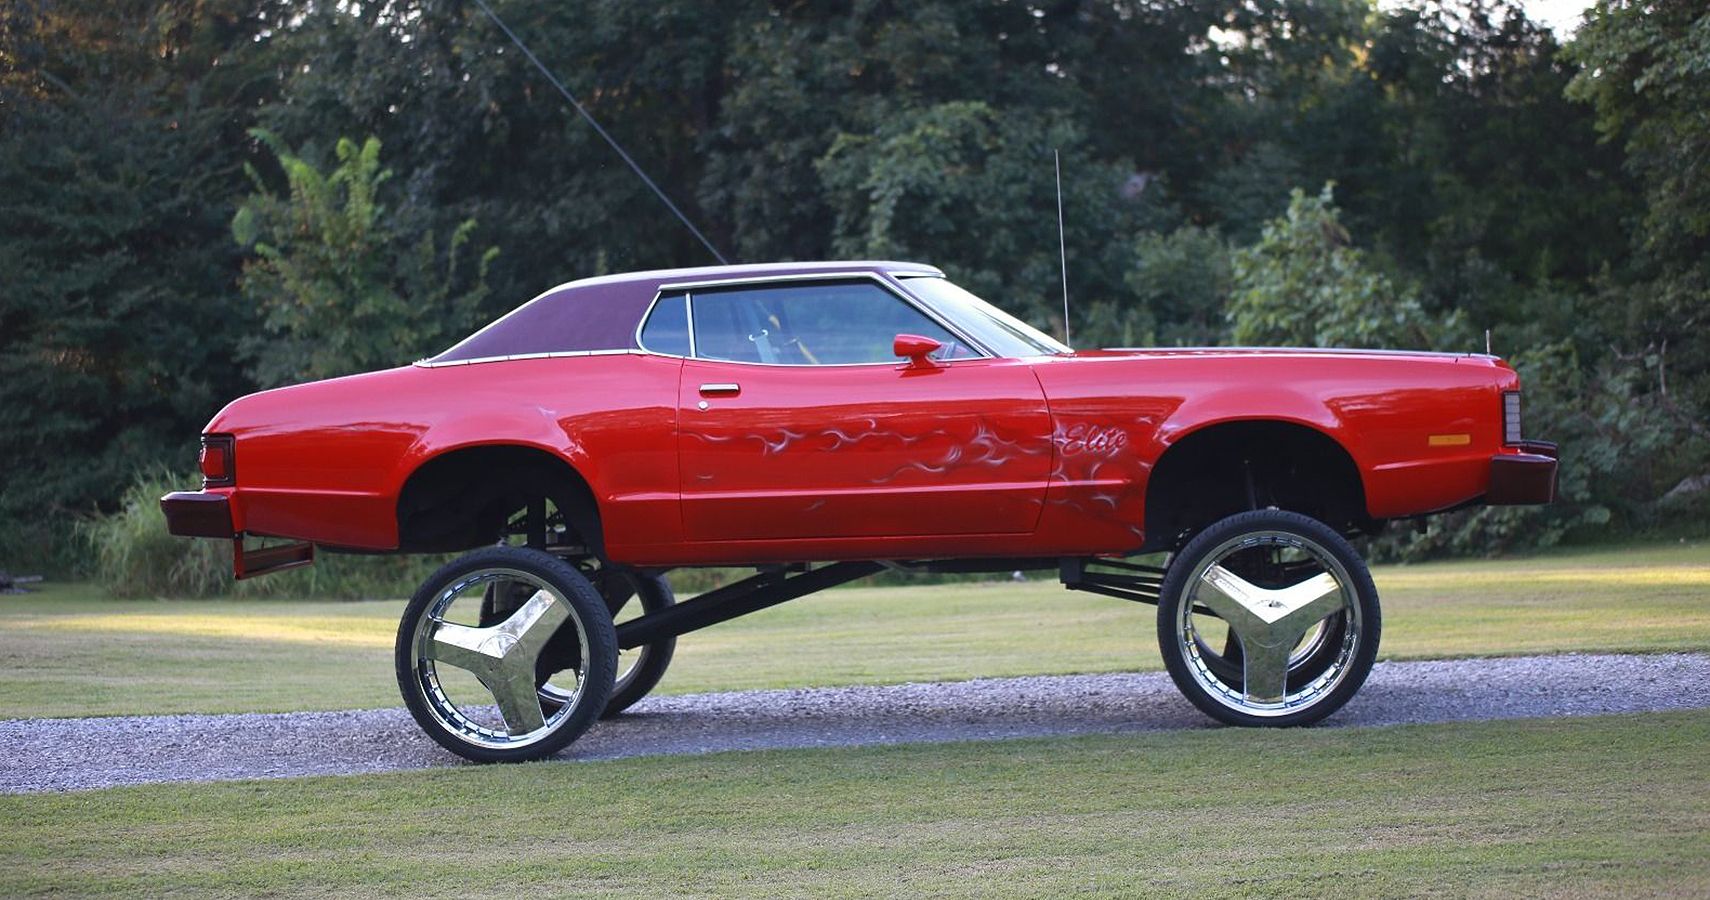 The Hydraulic Donk On Roids: Red Torino